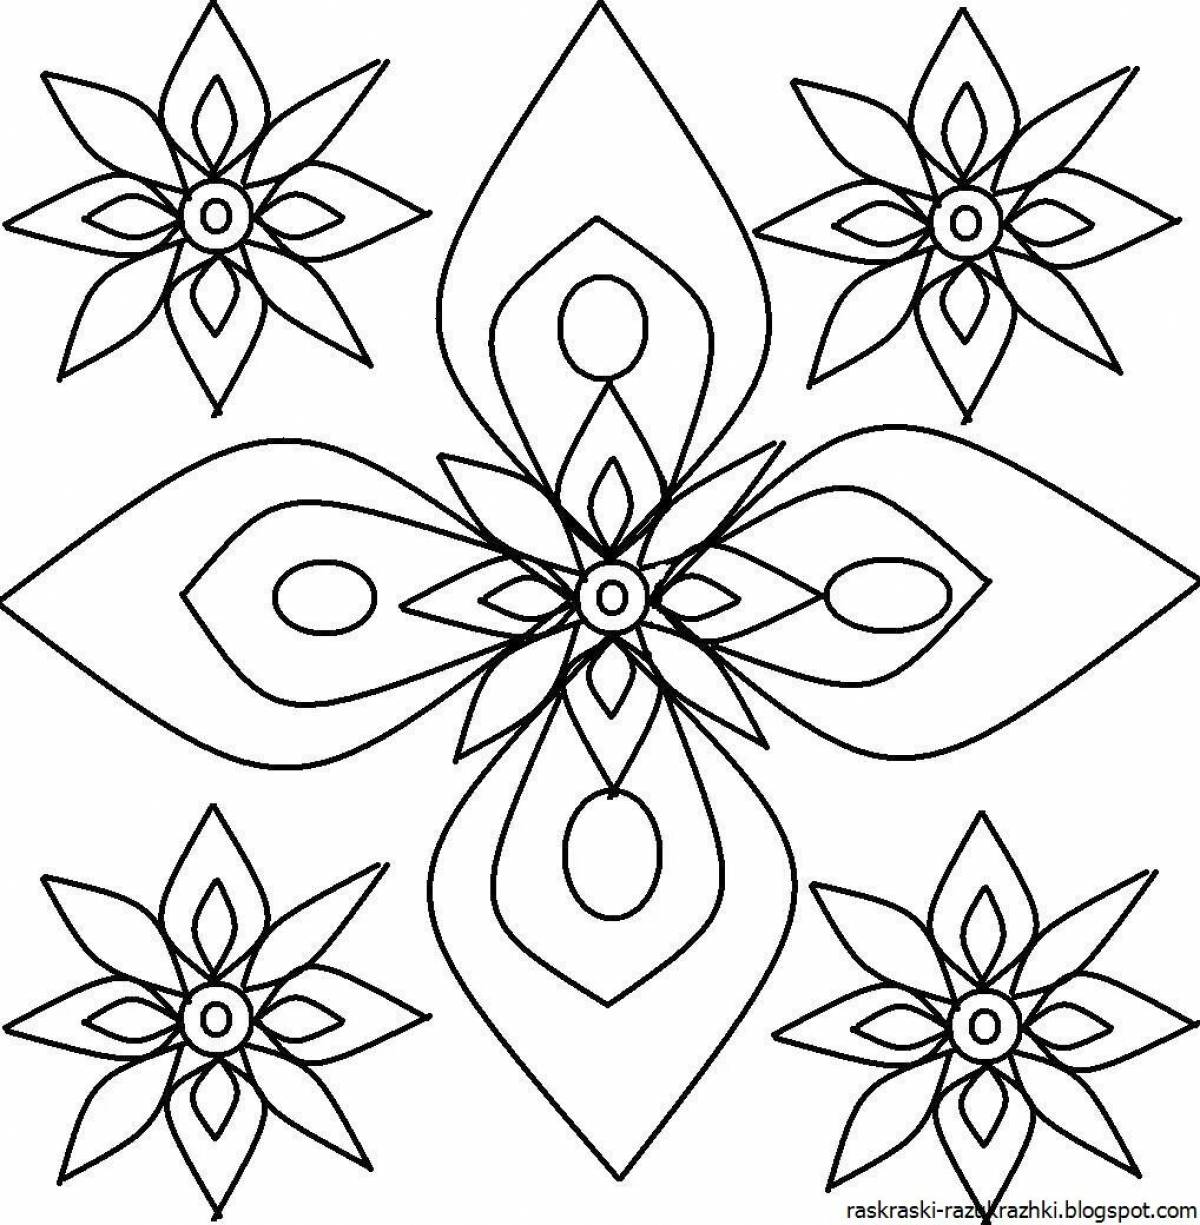 Colorful playful handkerchief coloring page